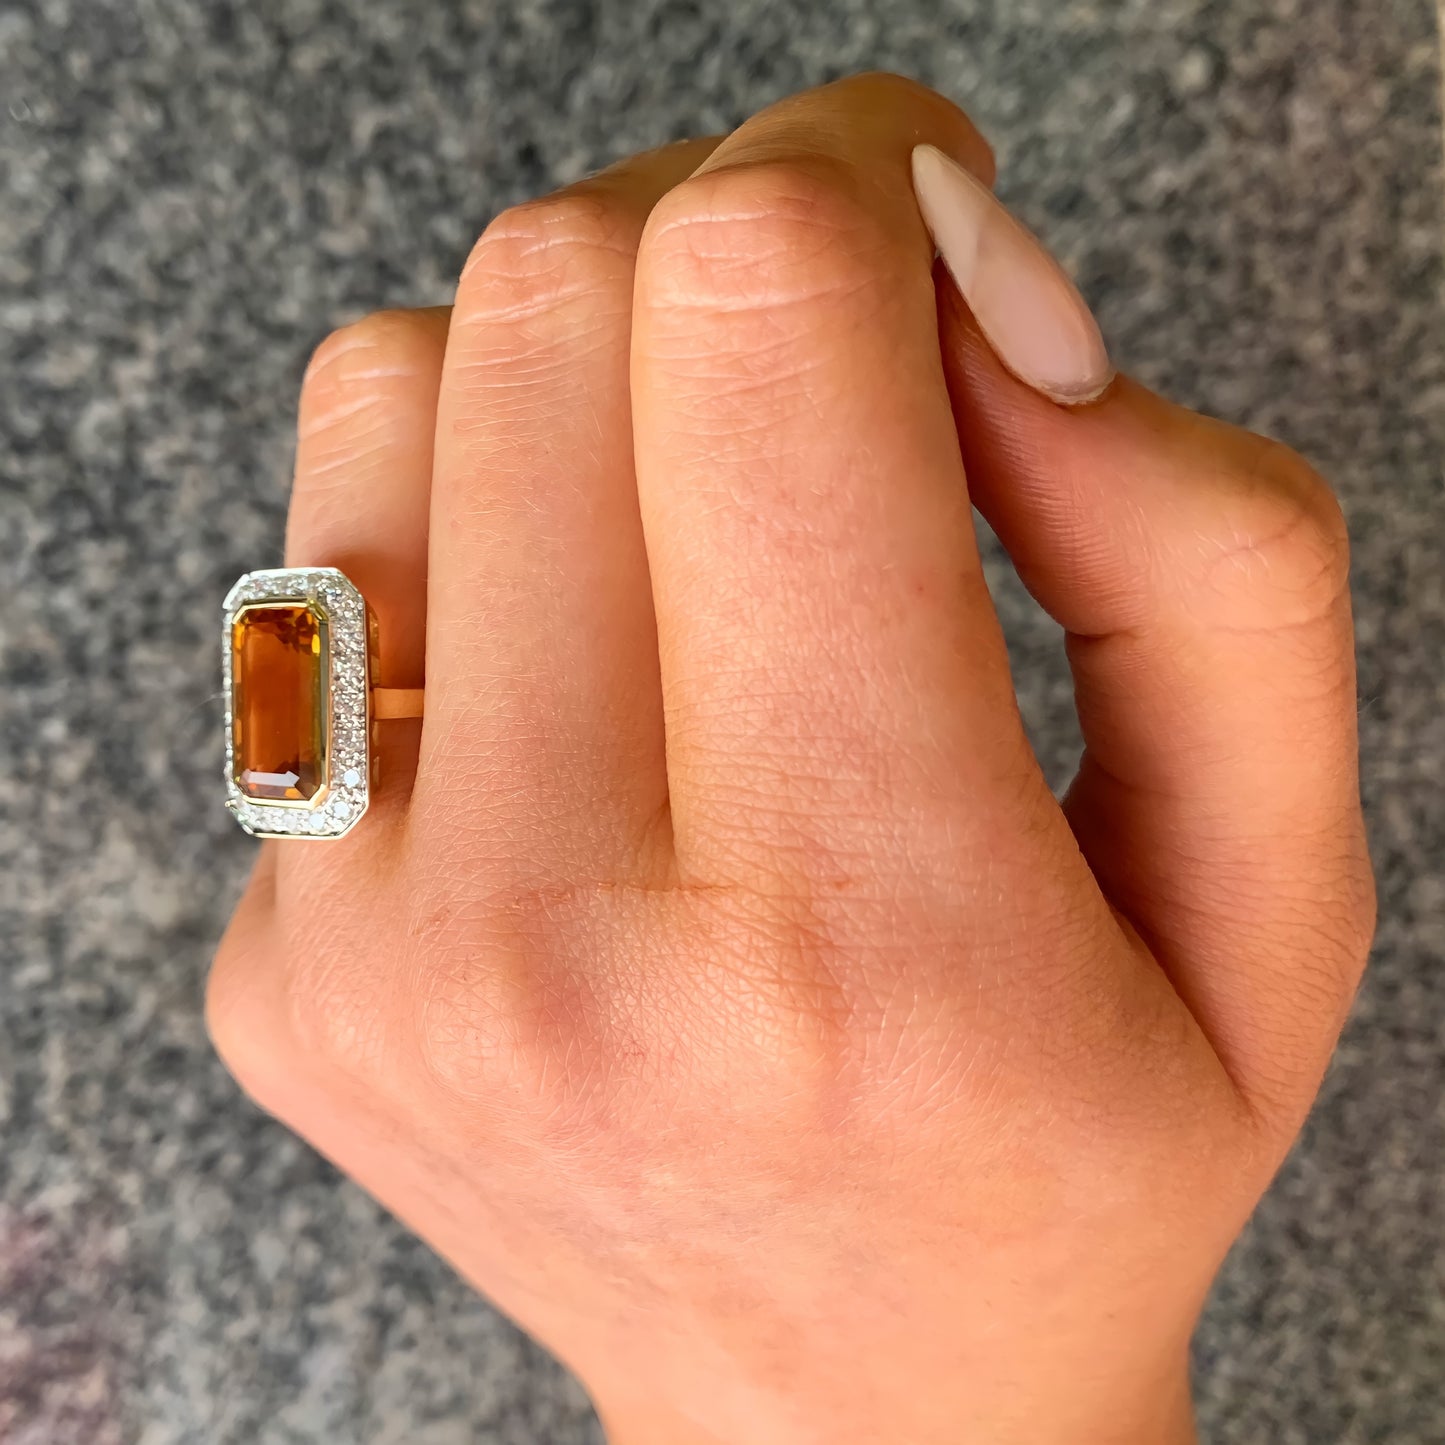 9ct Yellow Gold Madeira Citrine and Diamond Halo Cocktail Ring - Size N 1/2